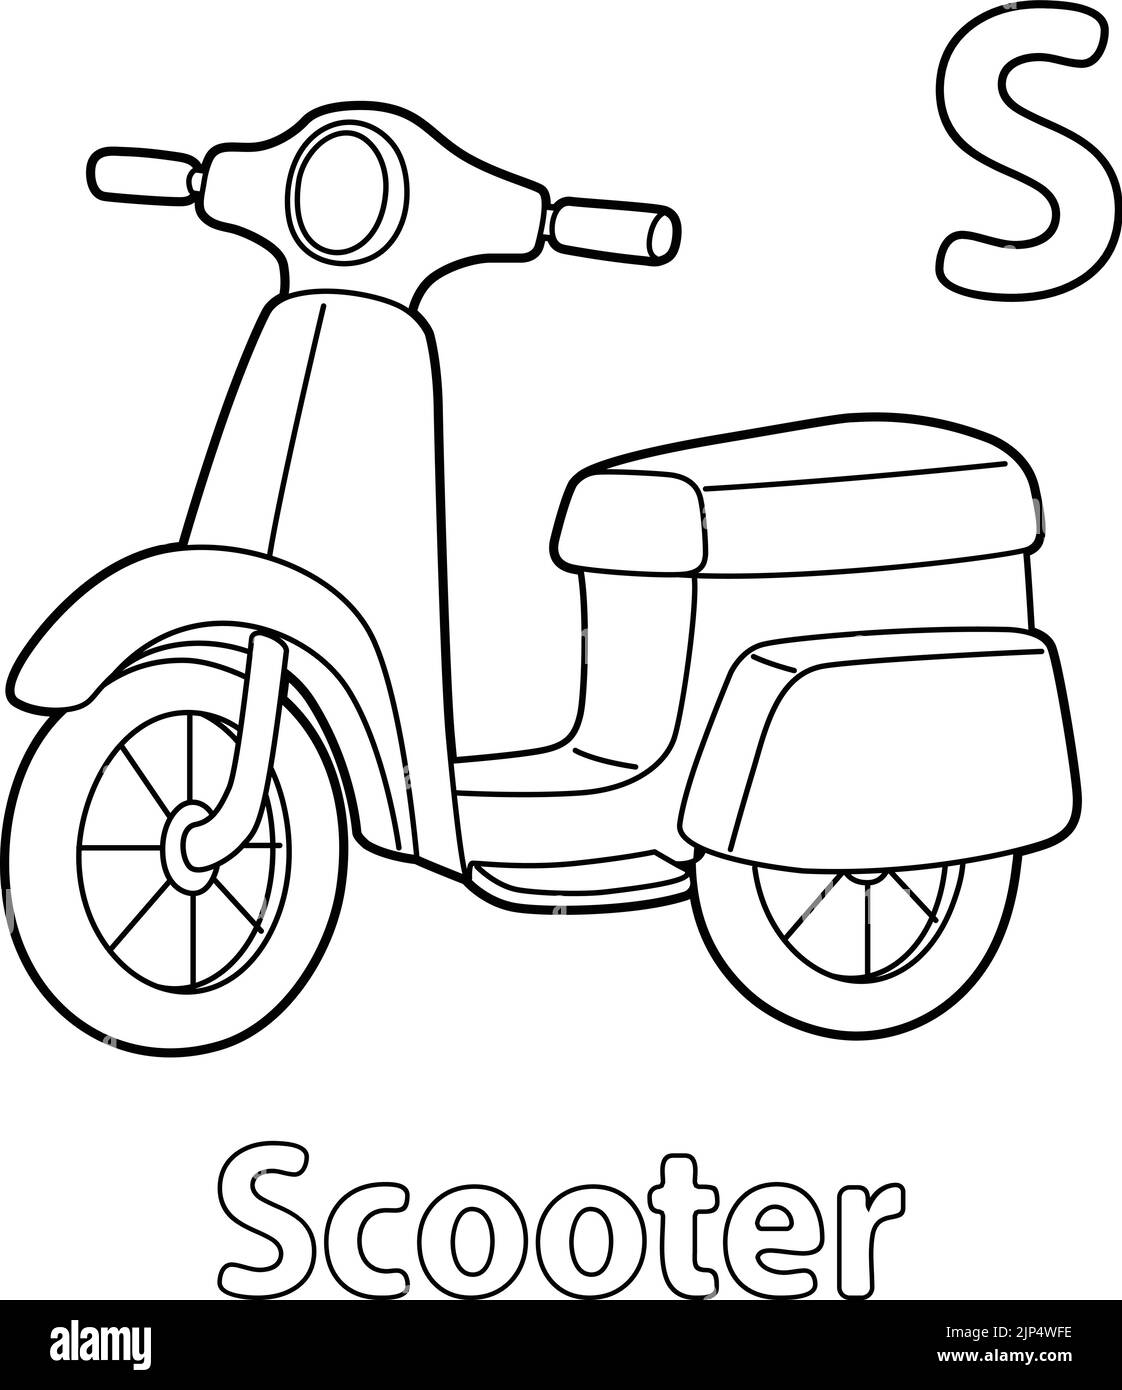 Scooter Alphabet ABC Coloring Page S Stock Vector